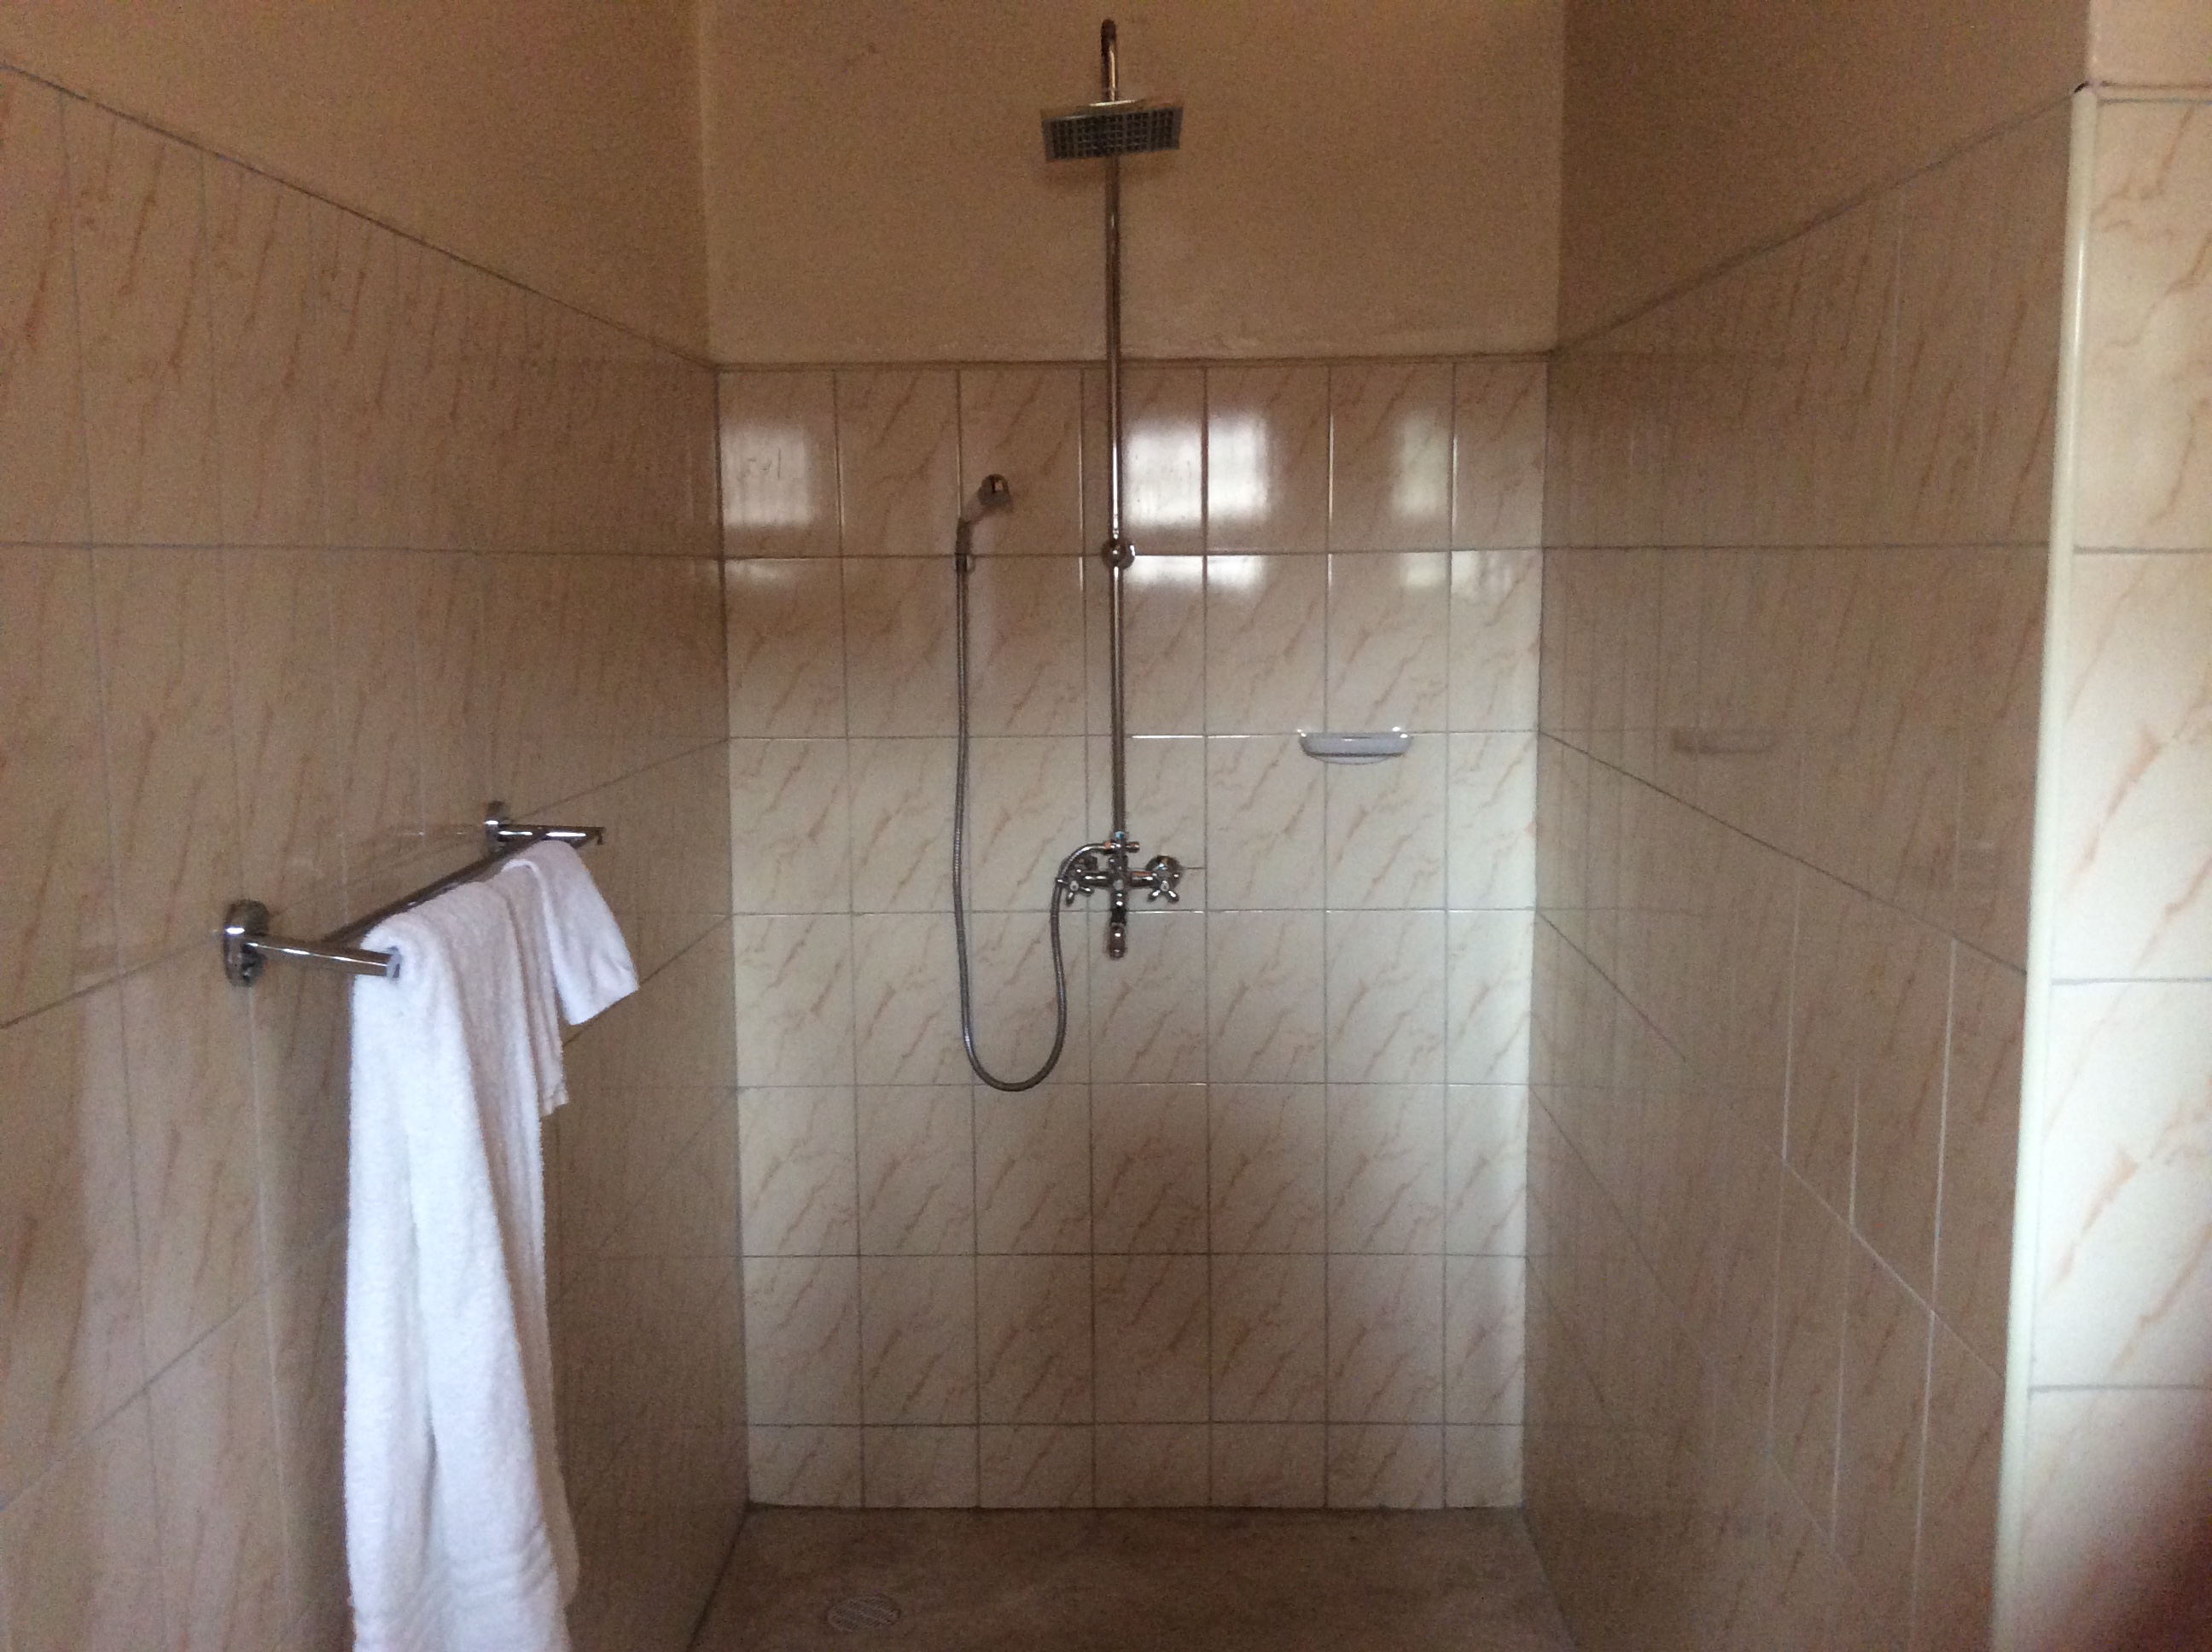 Shower in the cottage